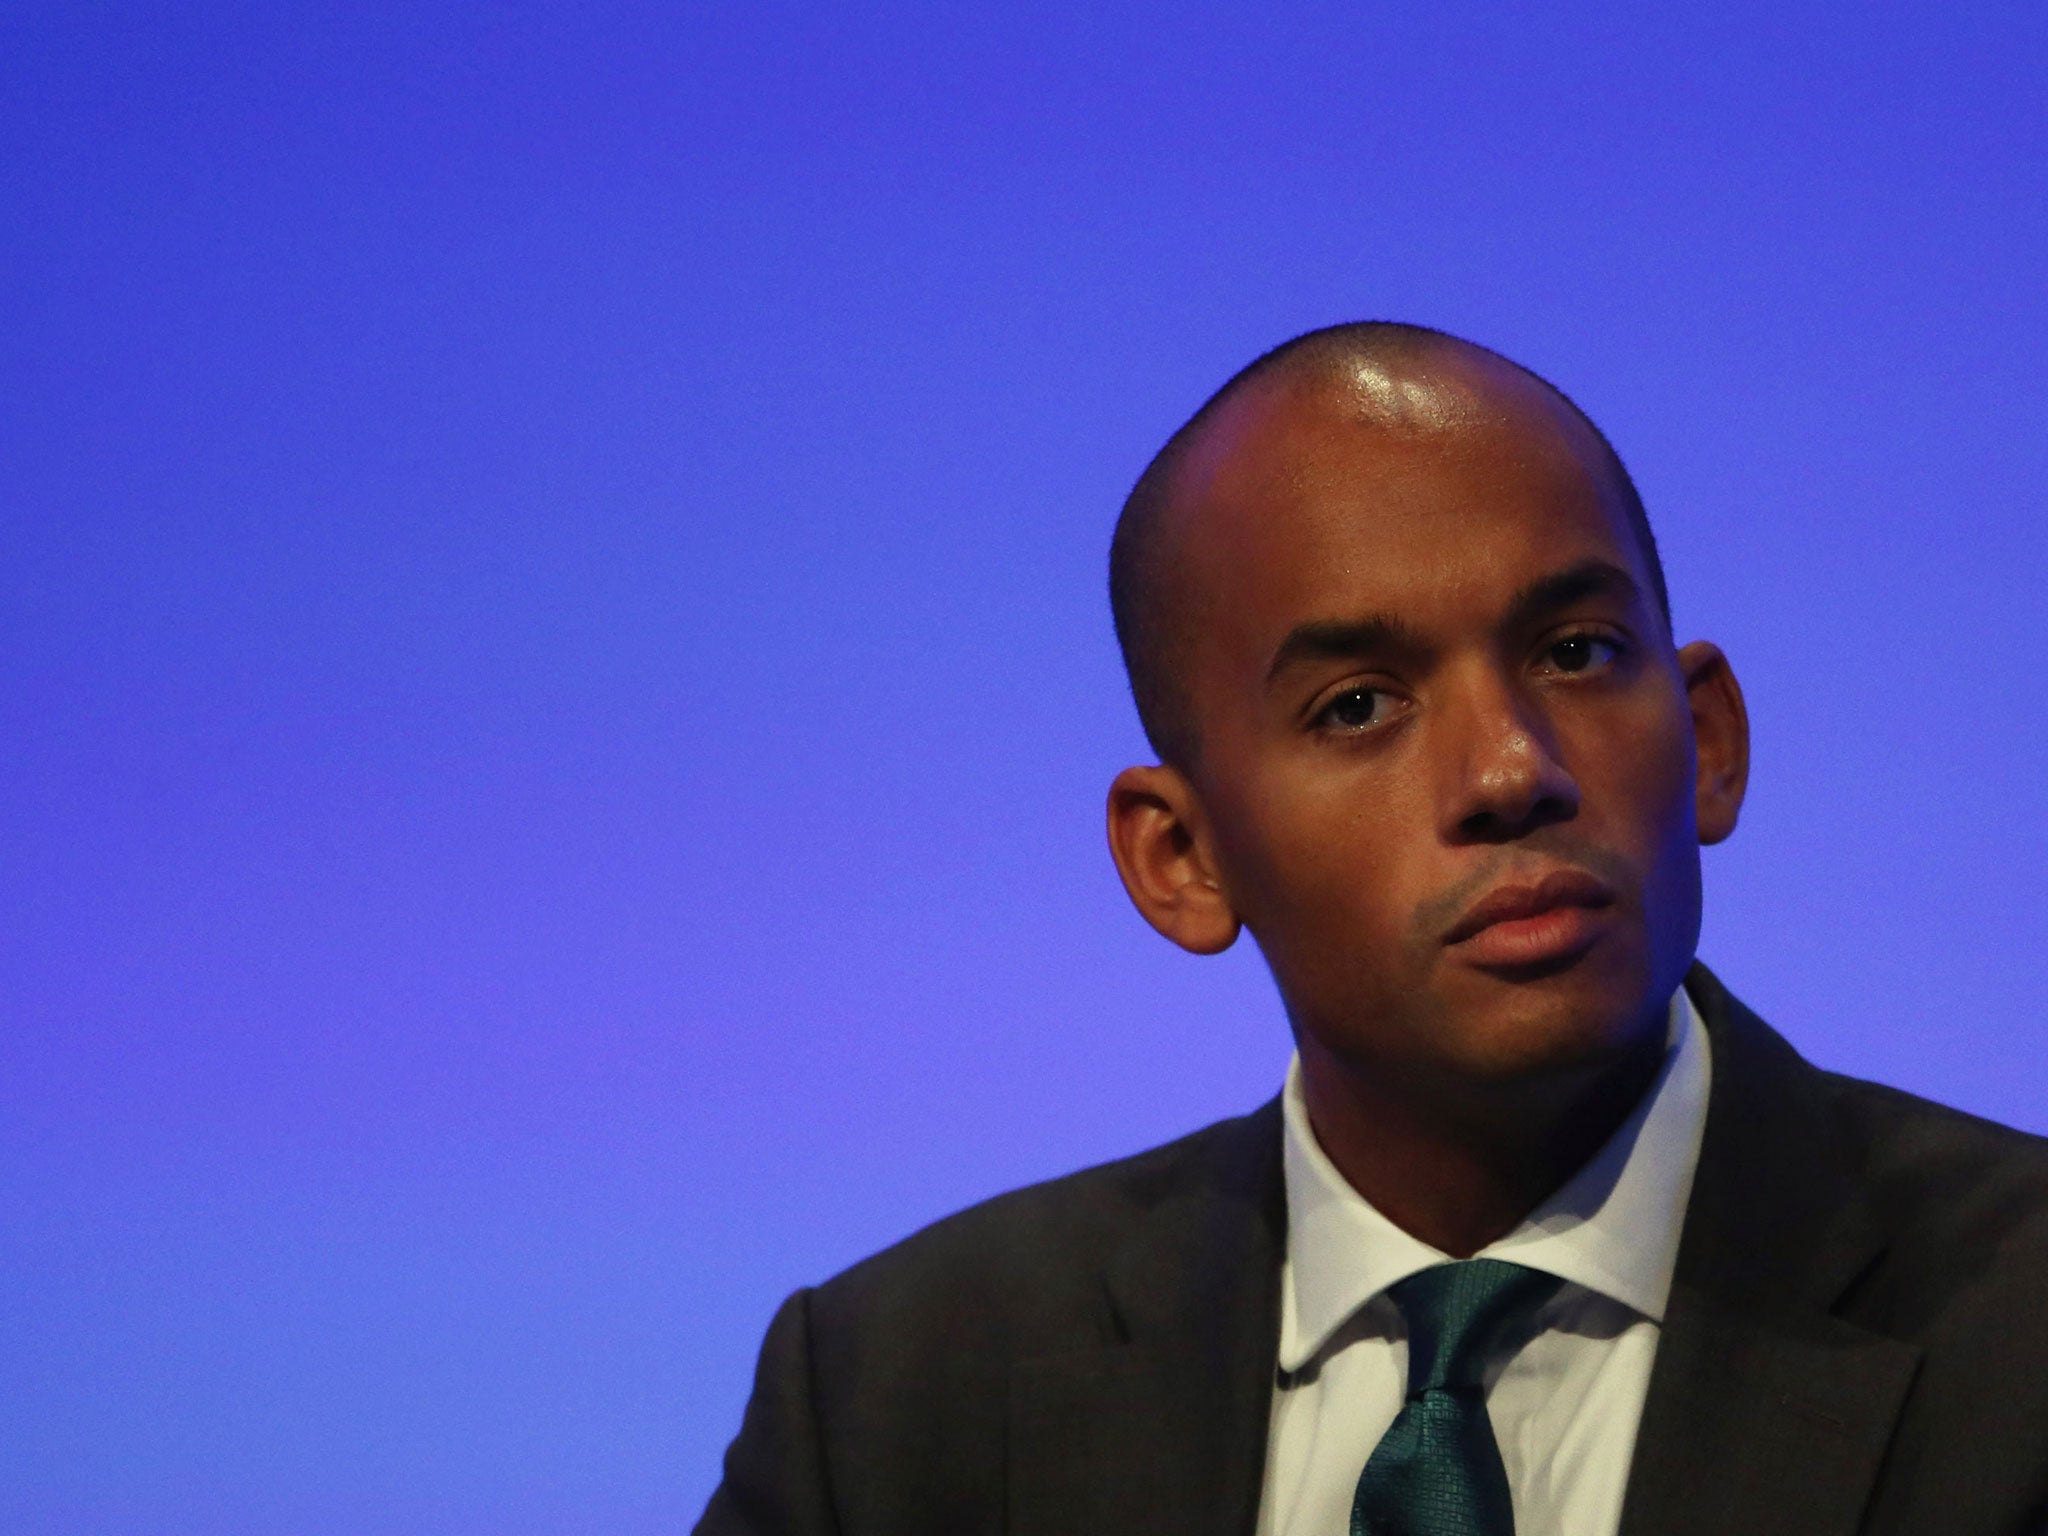 Chuka Umunna suggested citizens of the EU should not be able to move to another member state unless they already had a job offer there